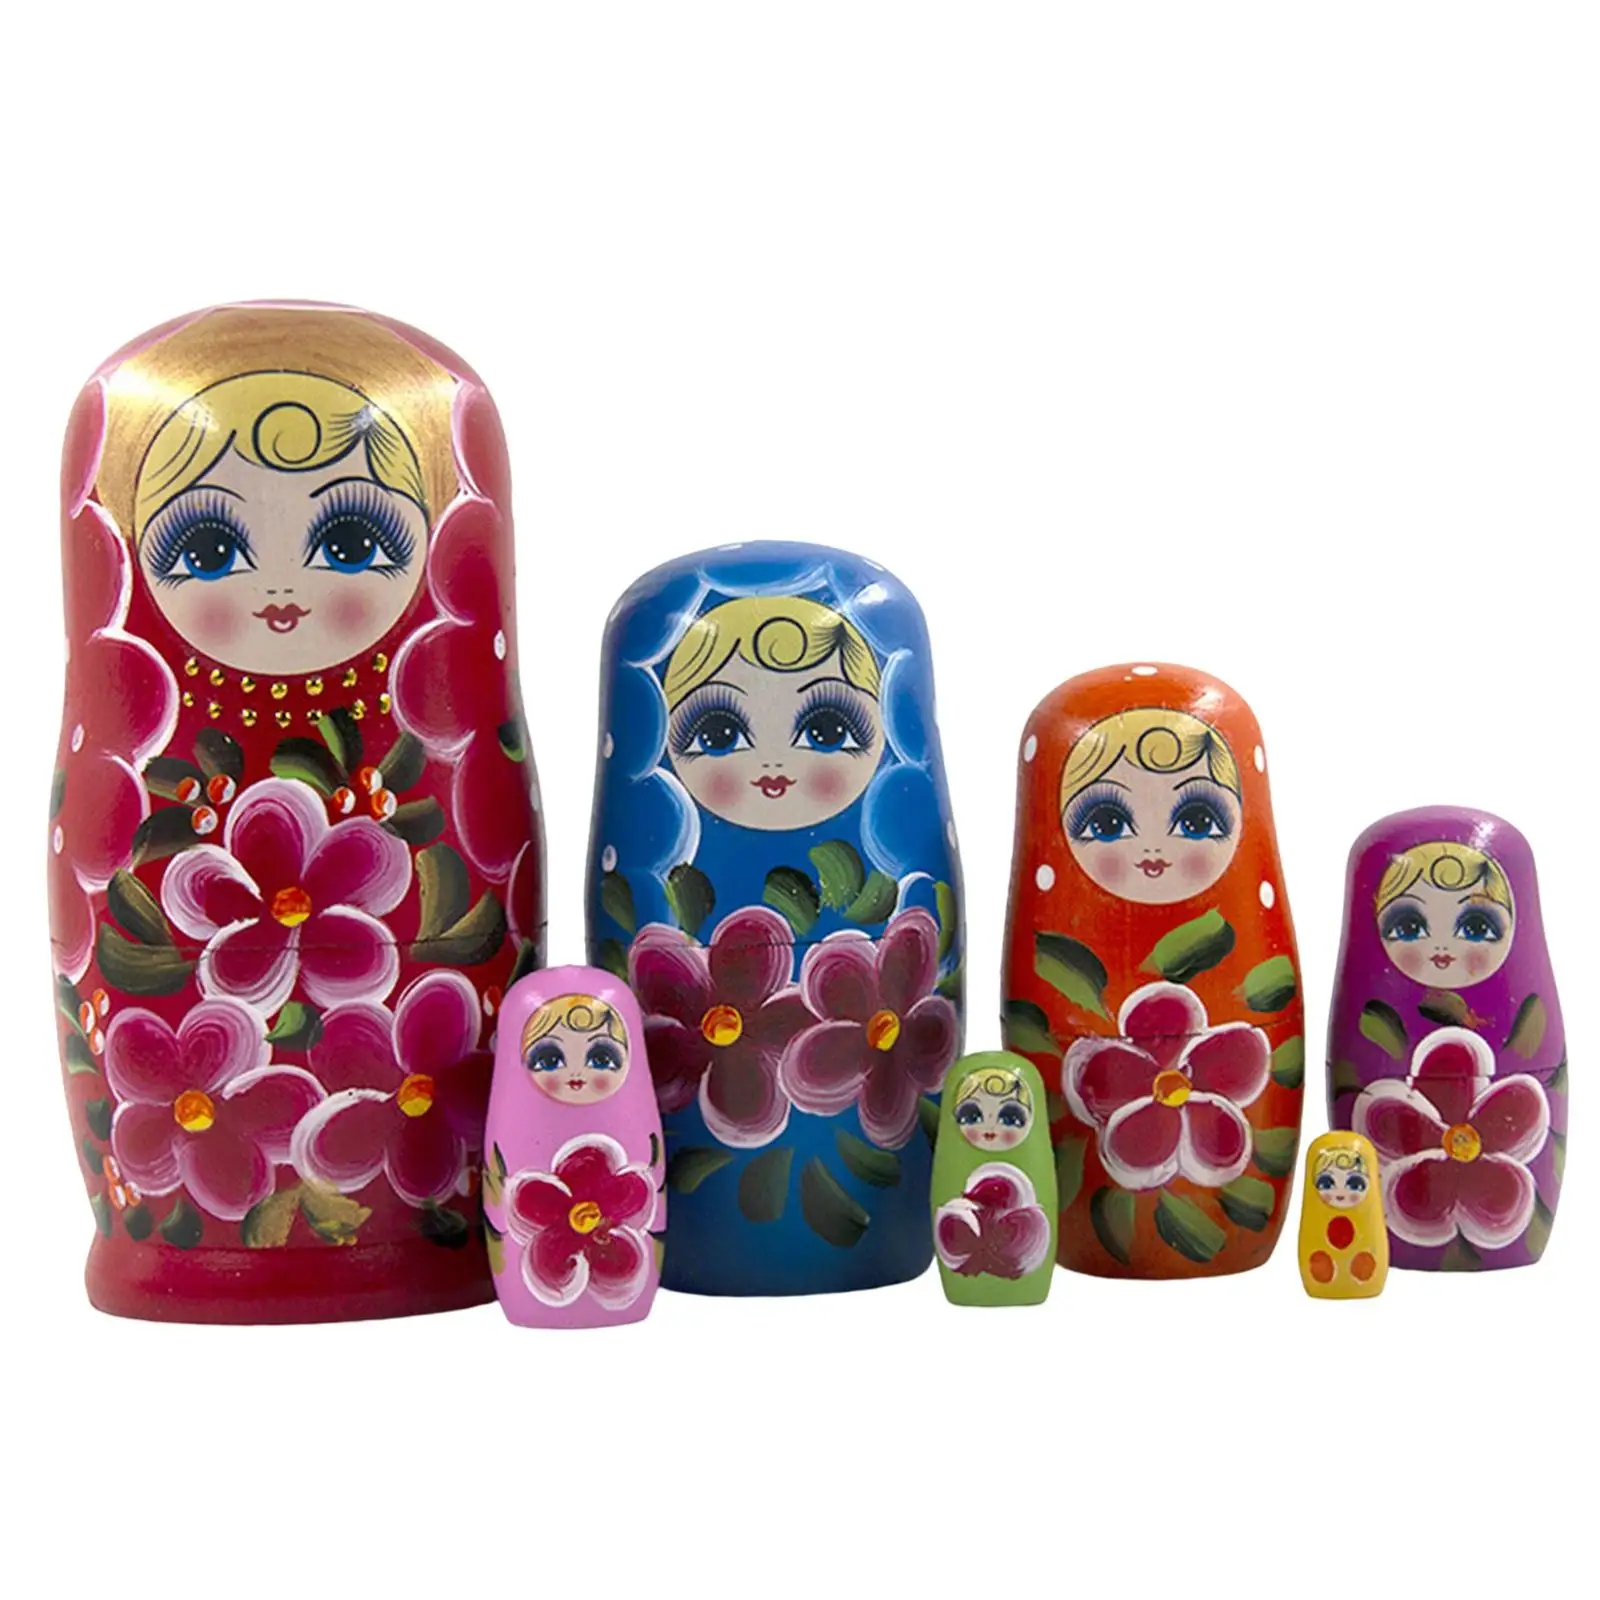 

Lovely Girls Nesting Dolls Stacking Doll 7 Pieces Home Decoration Housewarming Gifts Handpainted Paintings Manually Done Popular